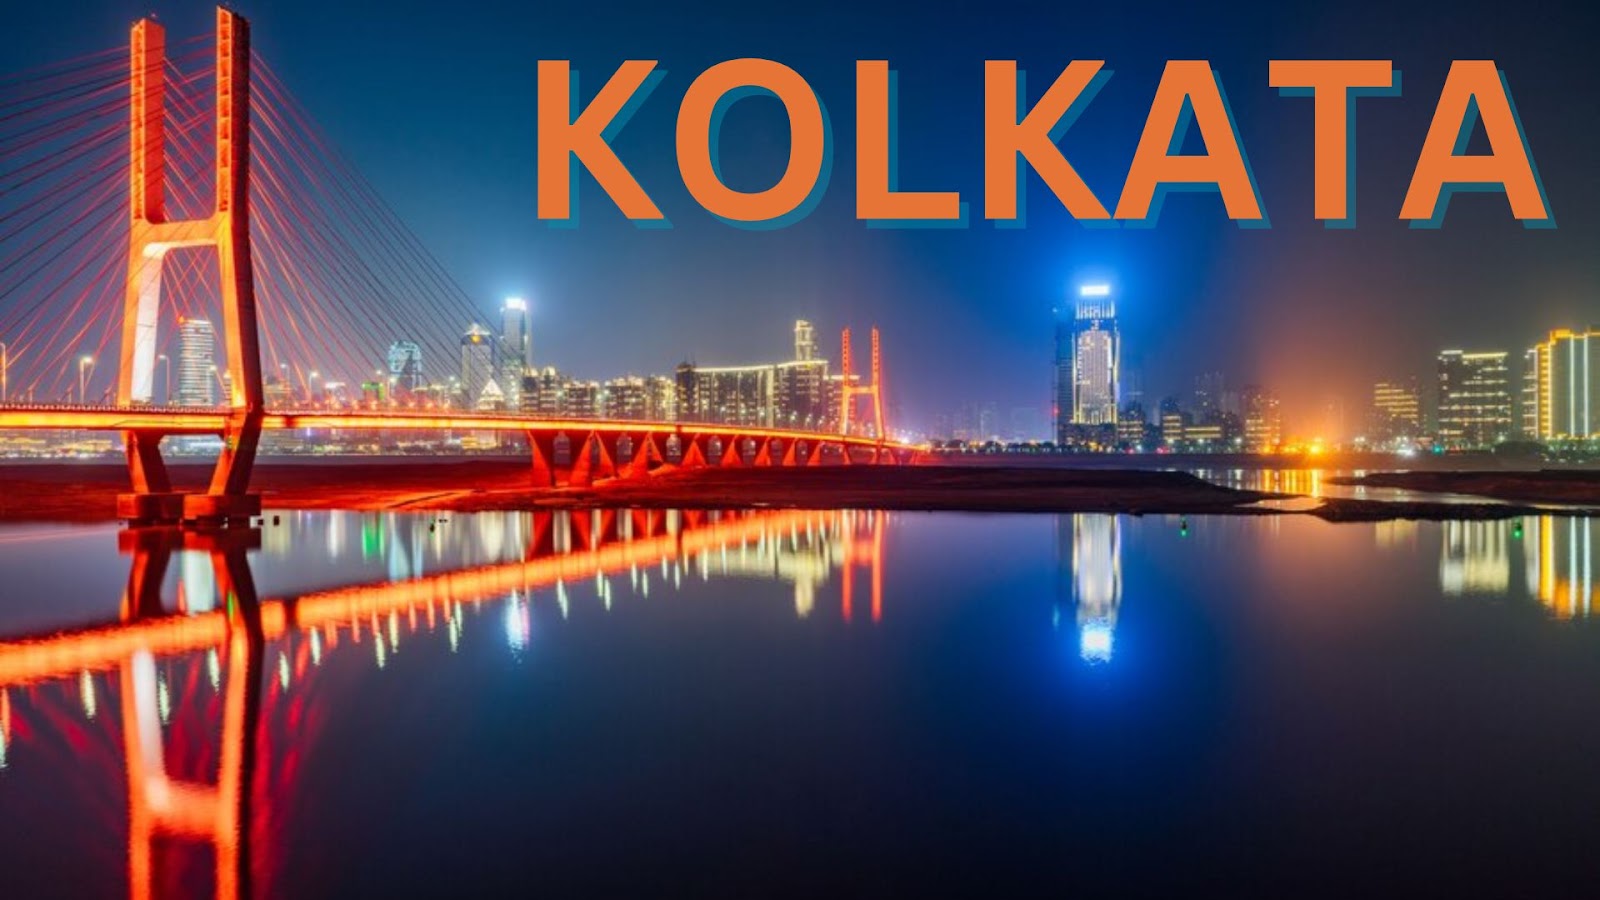 Kolkata is known for its historical culture and tradition.